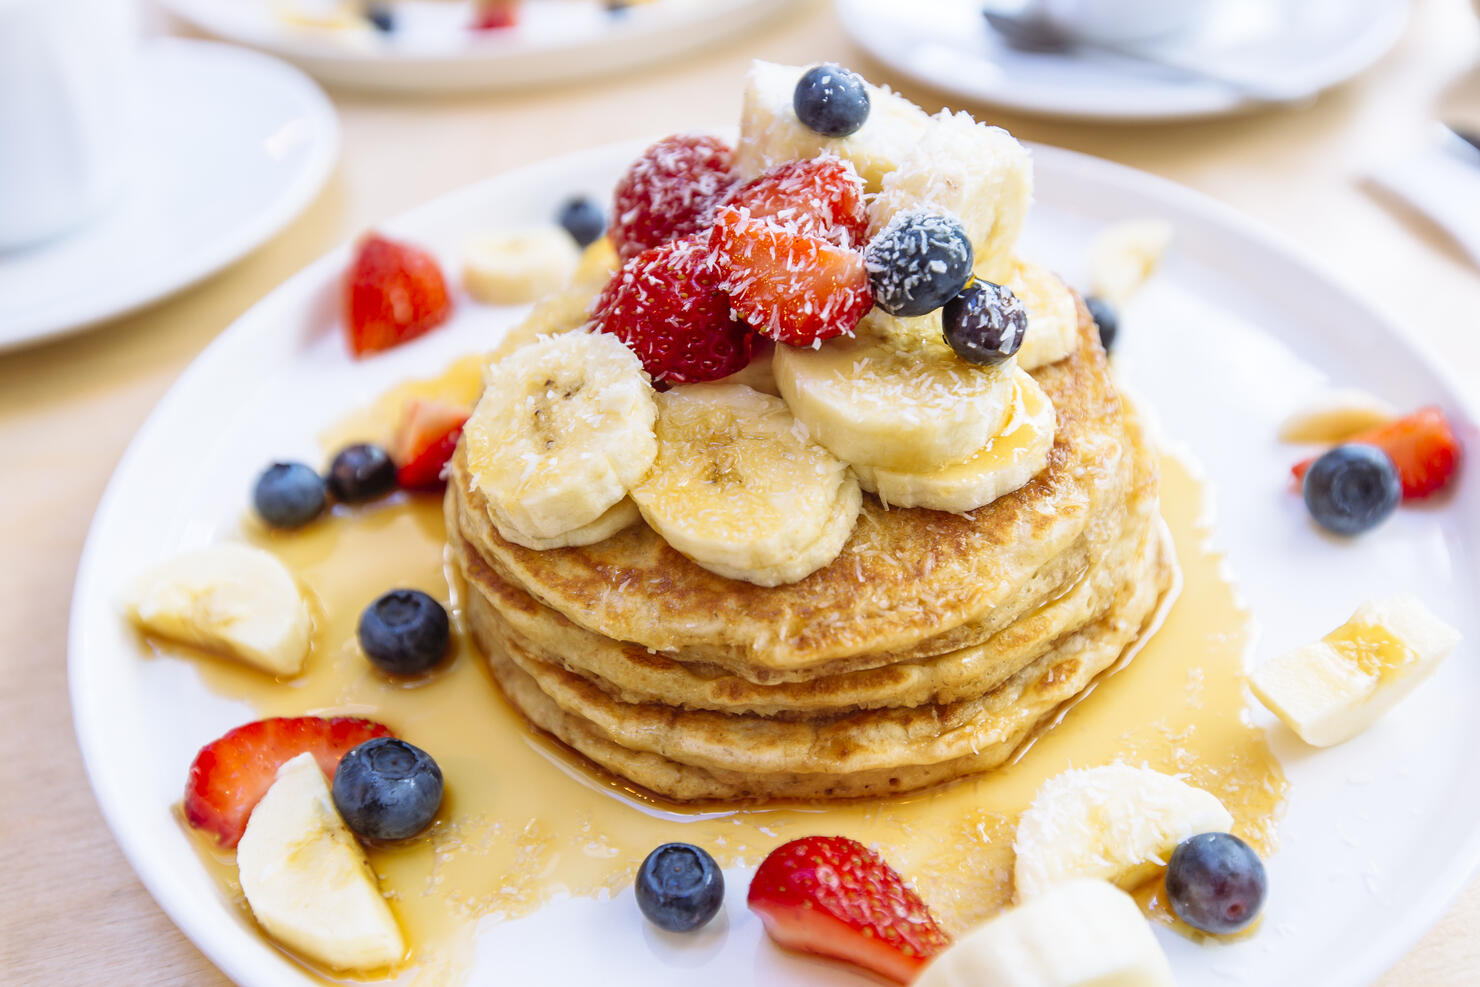 Close-up of delicious pancakes with fresh fruits, berries and maple syrup on a plate